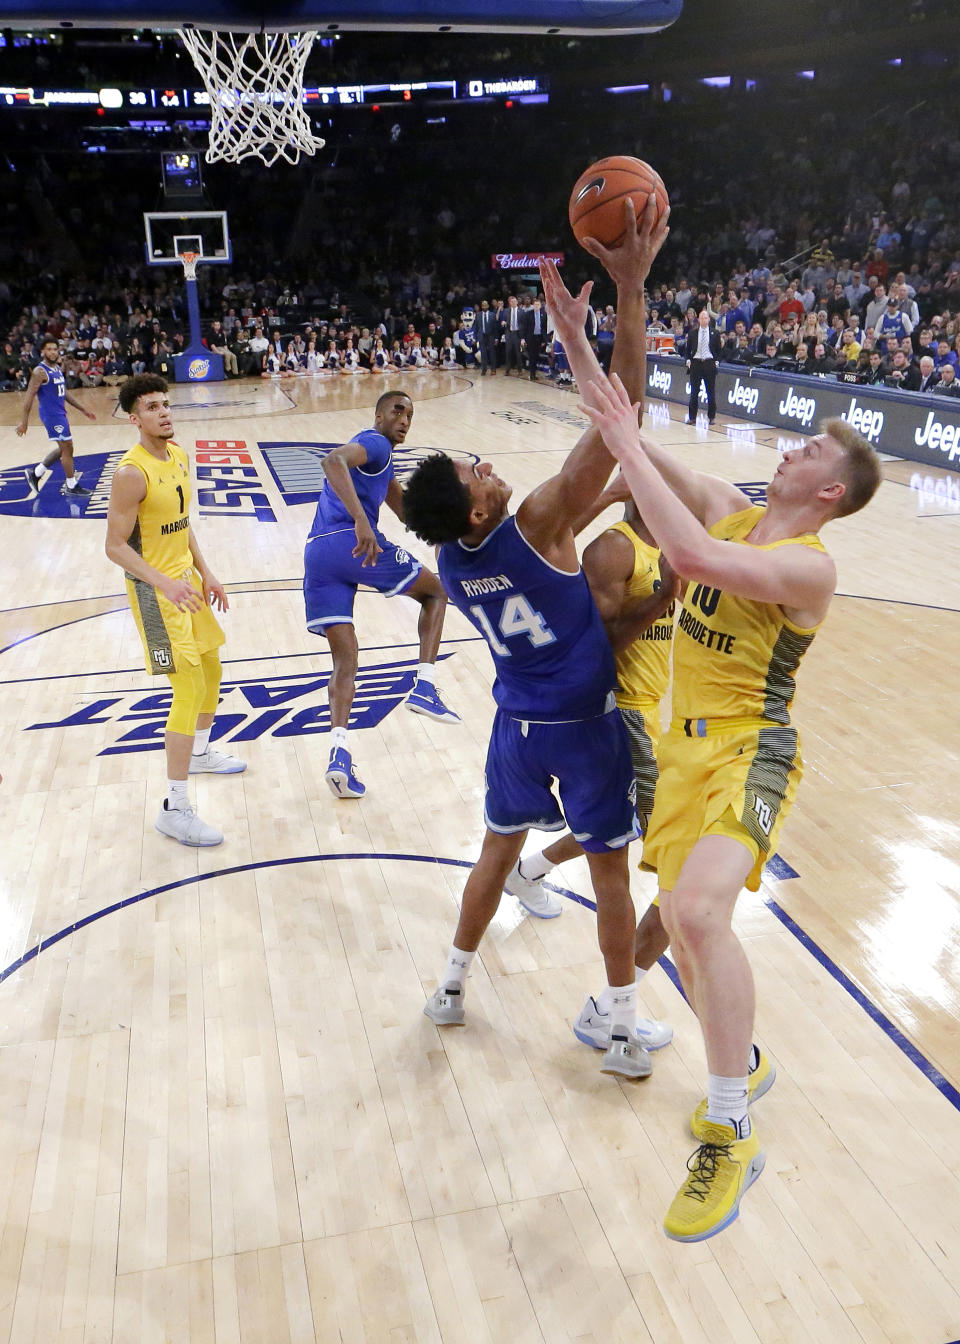 Seton Hall guard Jared Rhoden (14) competes for a rebound against Marquette forward Jamal Cain (23) and forward Sam Hauser (10) during the first half of an NCAA college basketball semifinal game in the Big East men's tournament, Friday, March 15, 2019, in New York. (AP Photo/Julio Cortez)